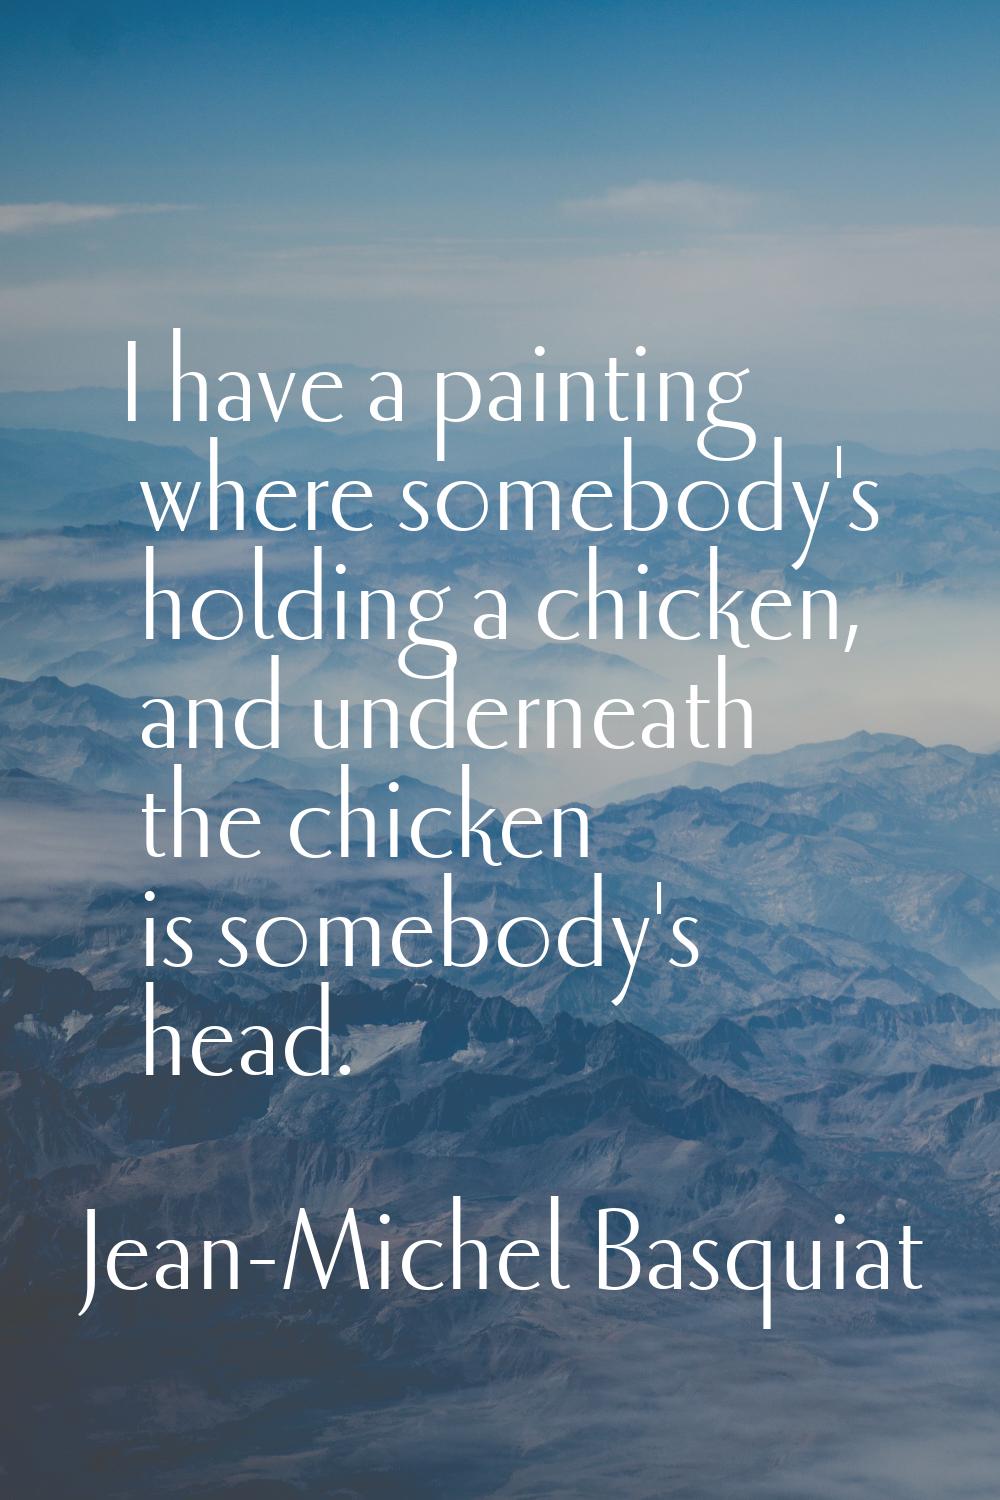 I have a painting where somebody's holding a chicken, and underneath the chicken is somebody's head